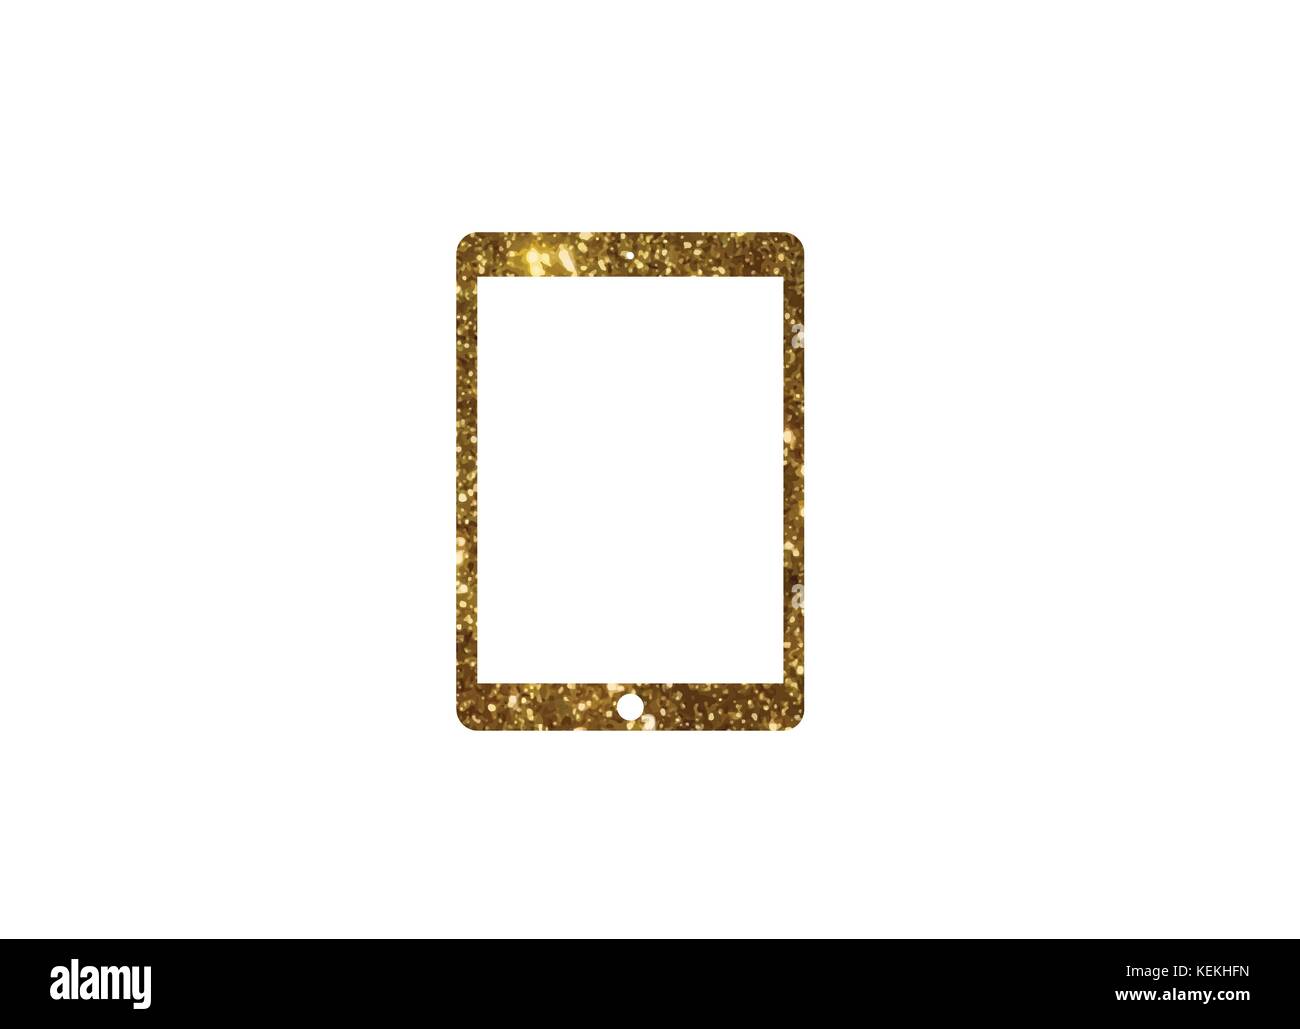 The vector golden glitter flat tablet computer icon on white background Stock Vector